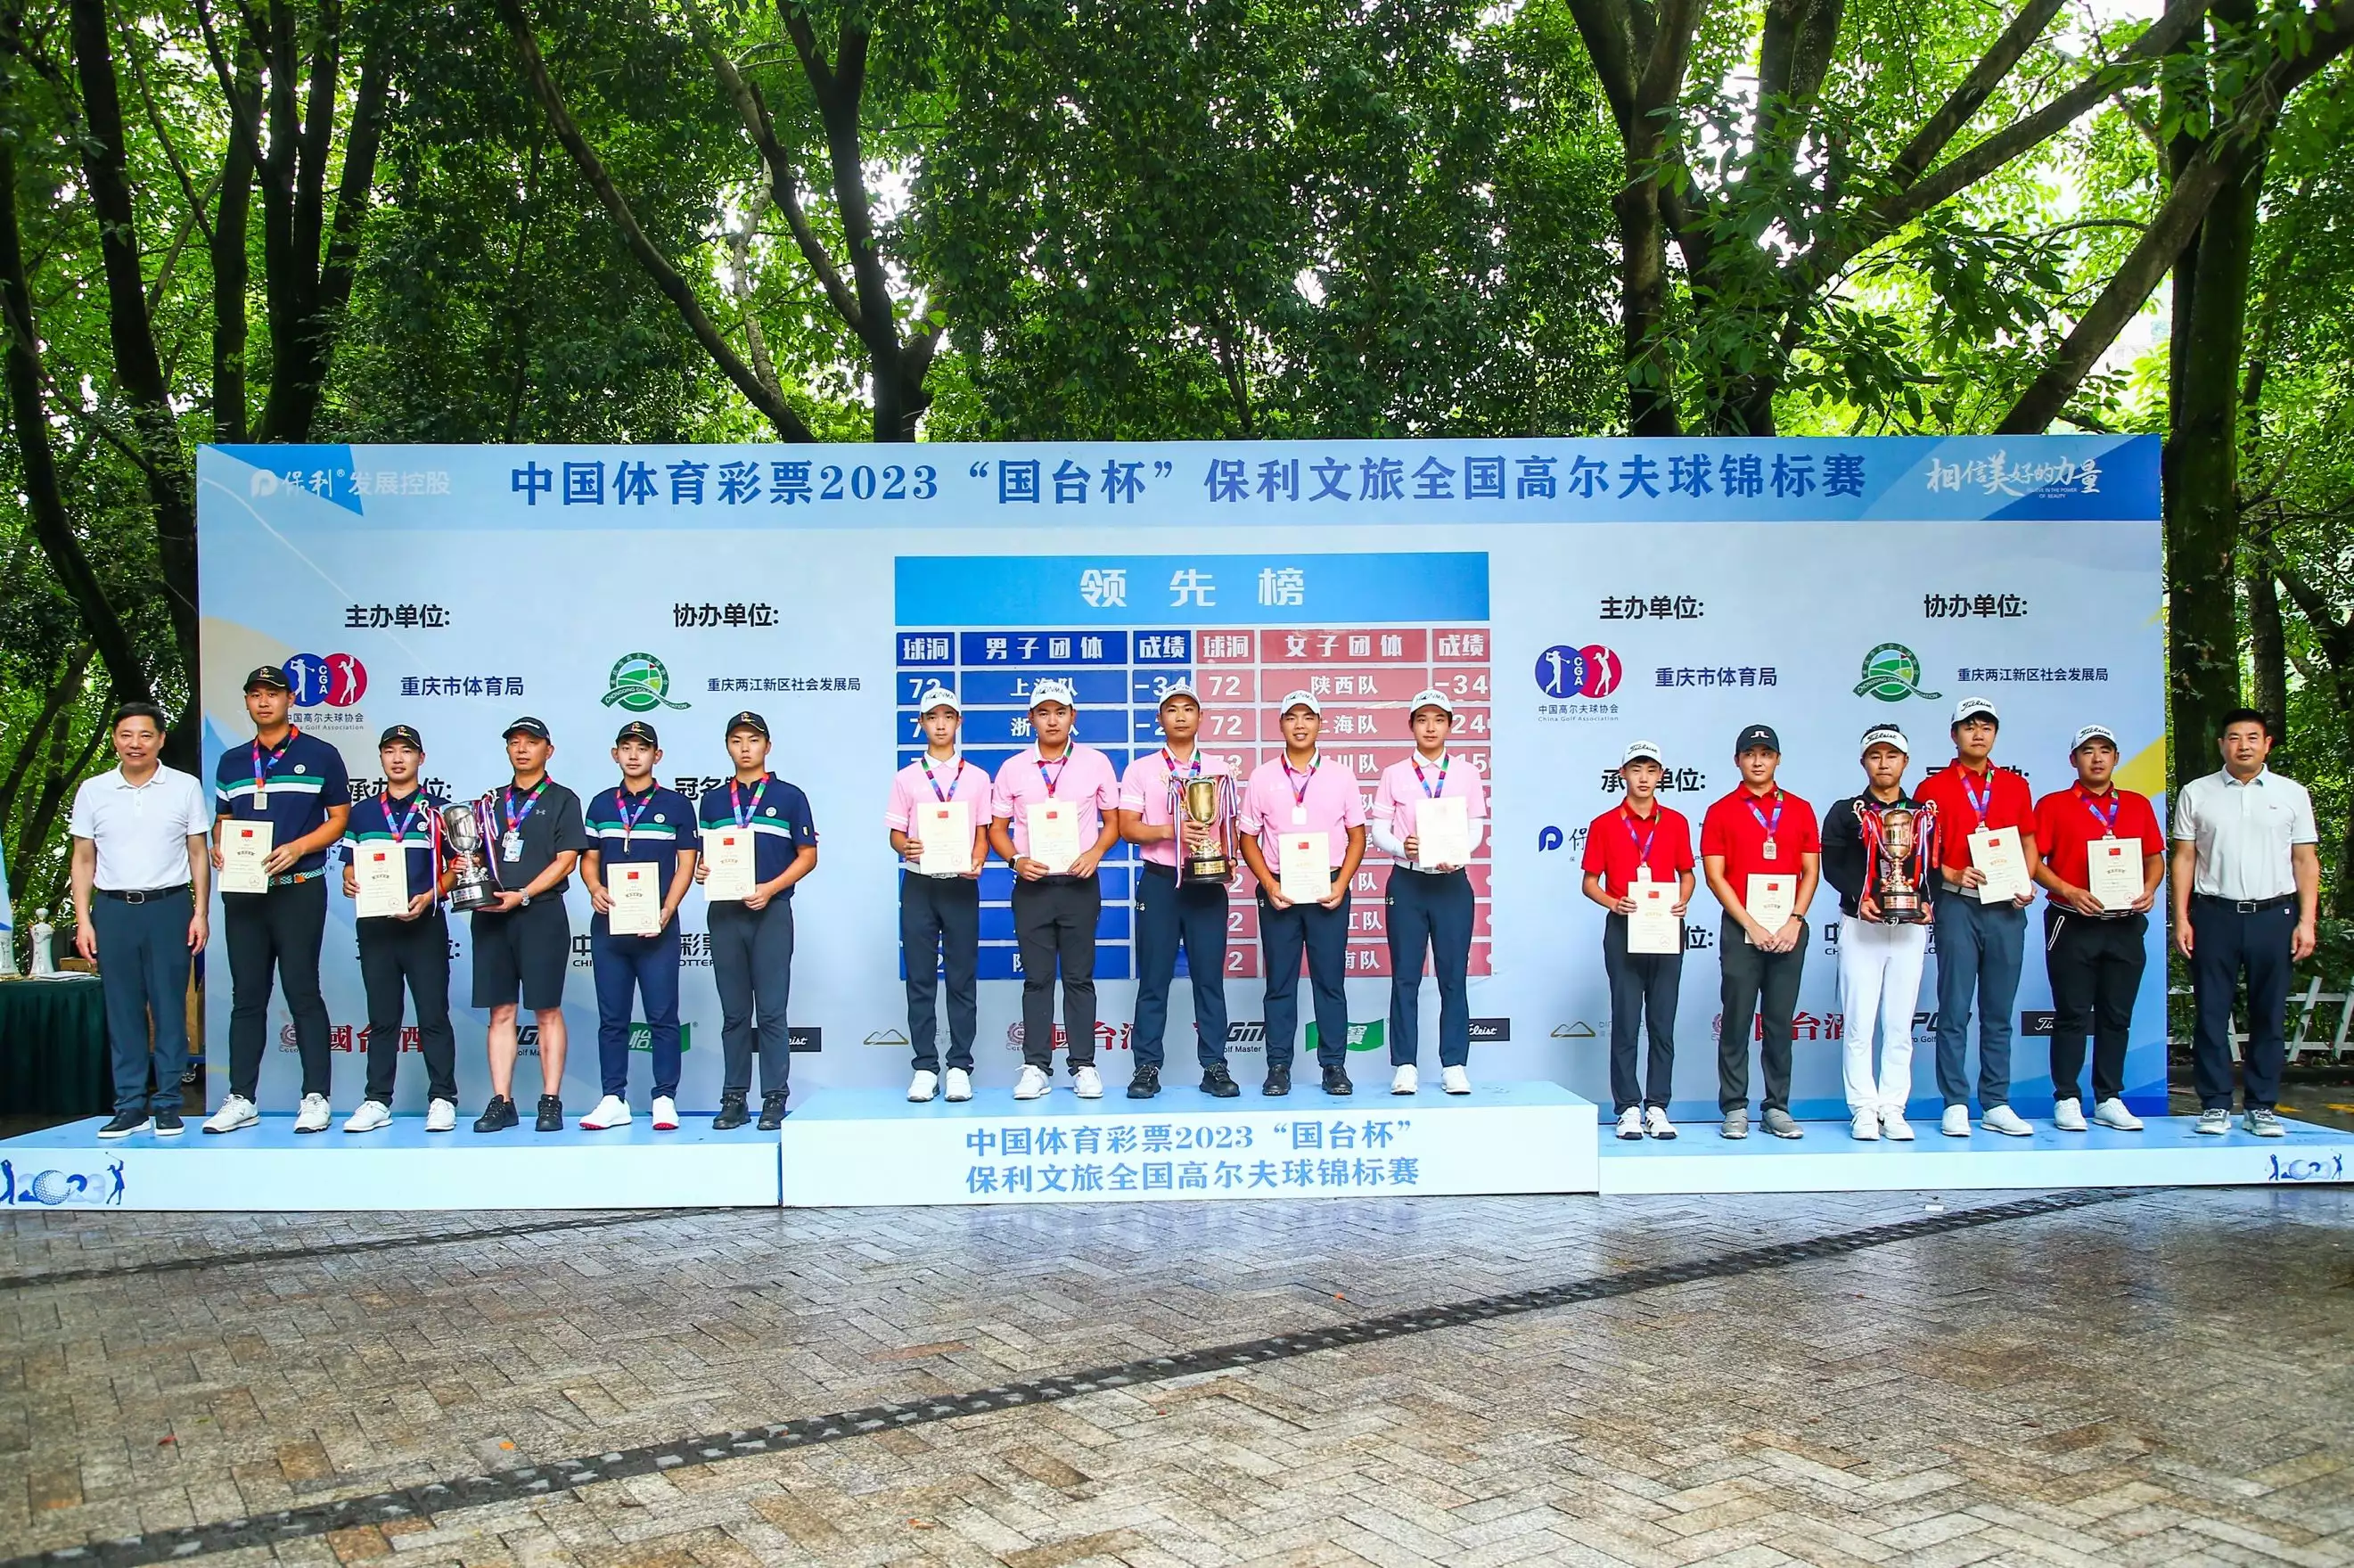 The National Golf Championship Chongqing Four Annual Awards announced the broadcast article